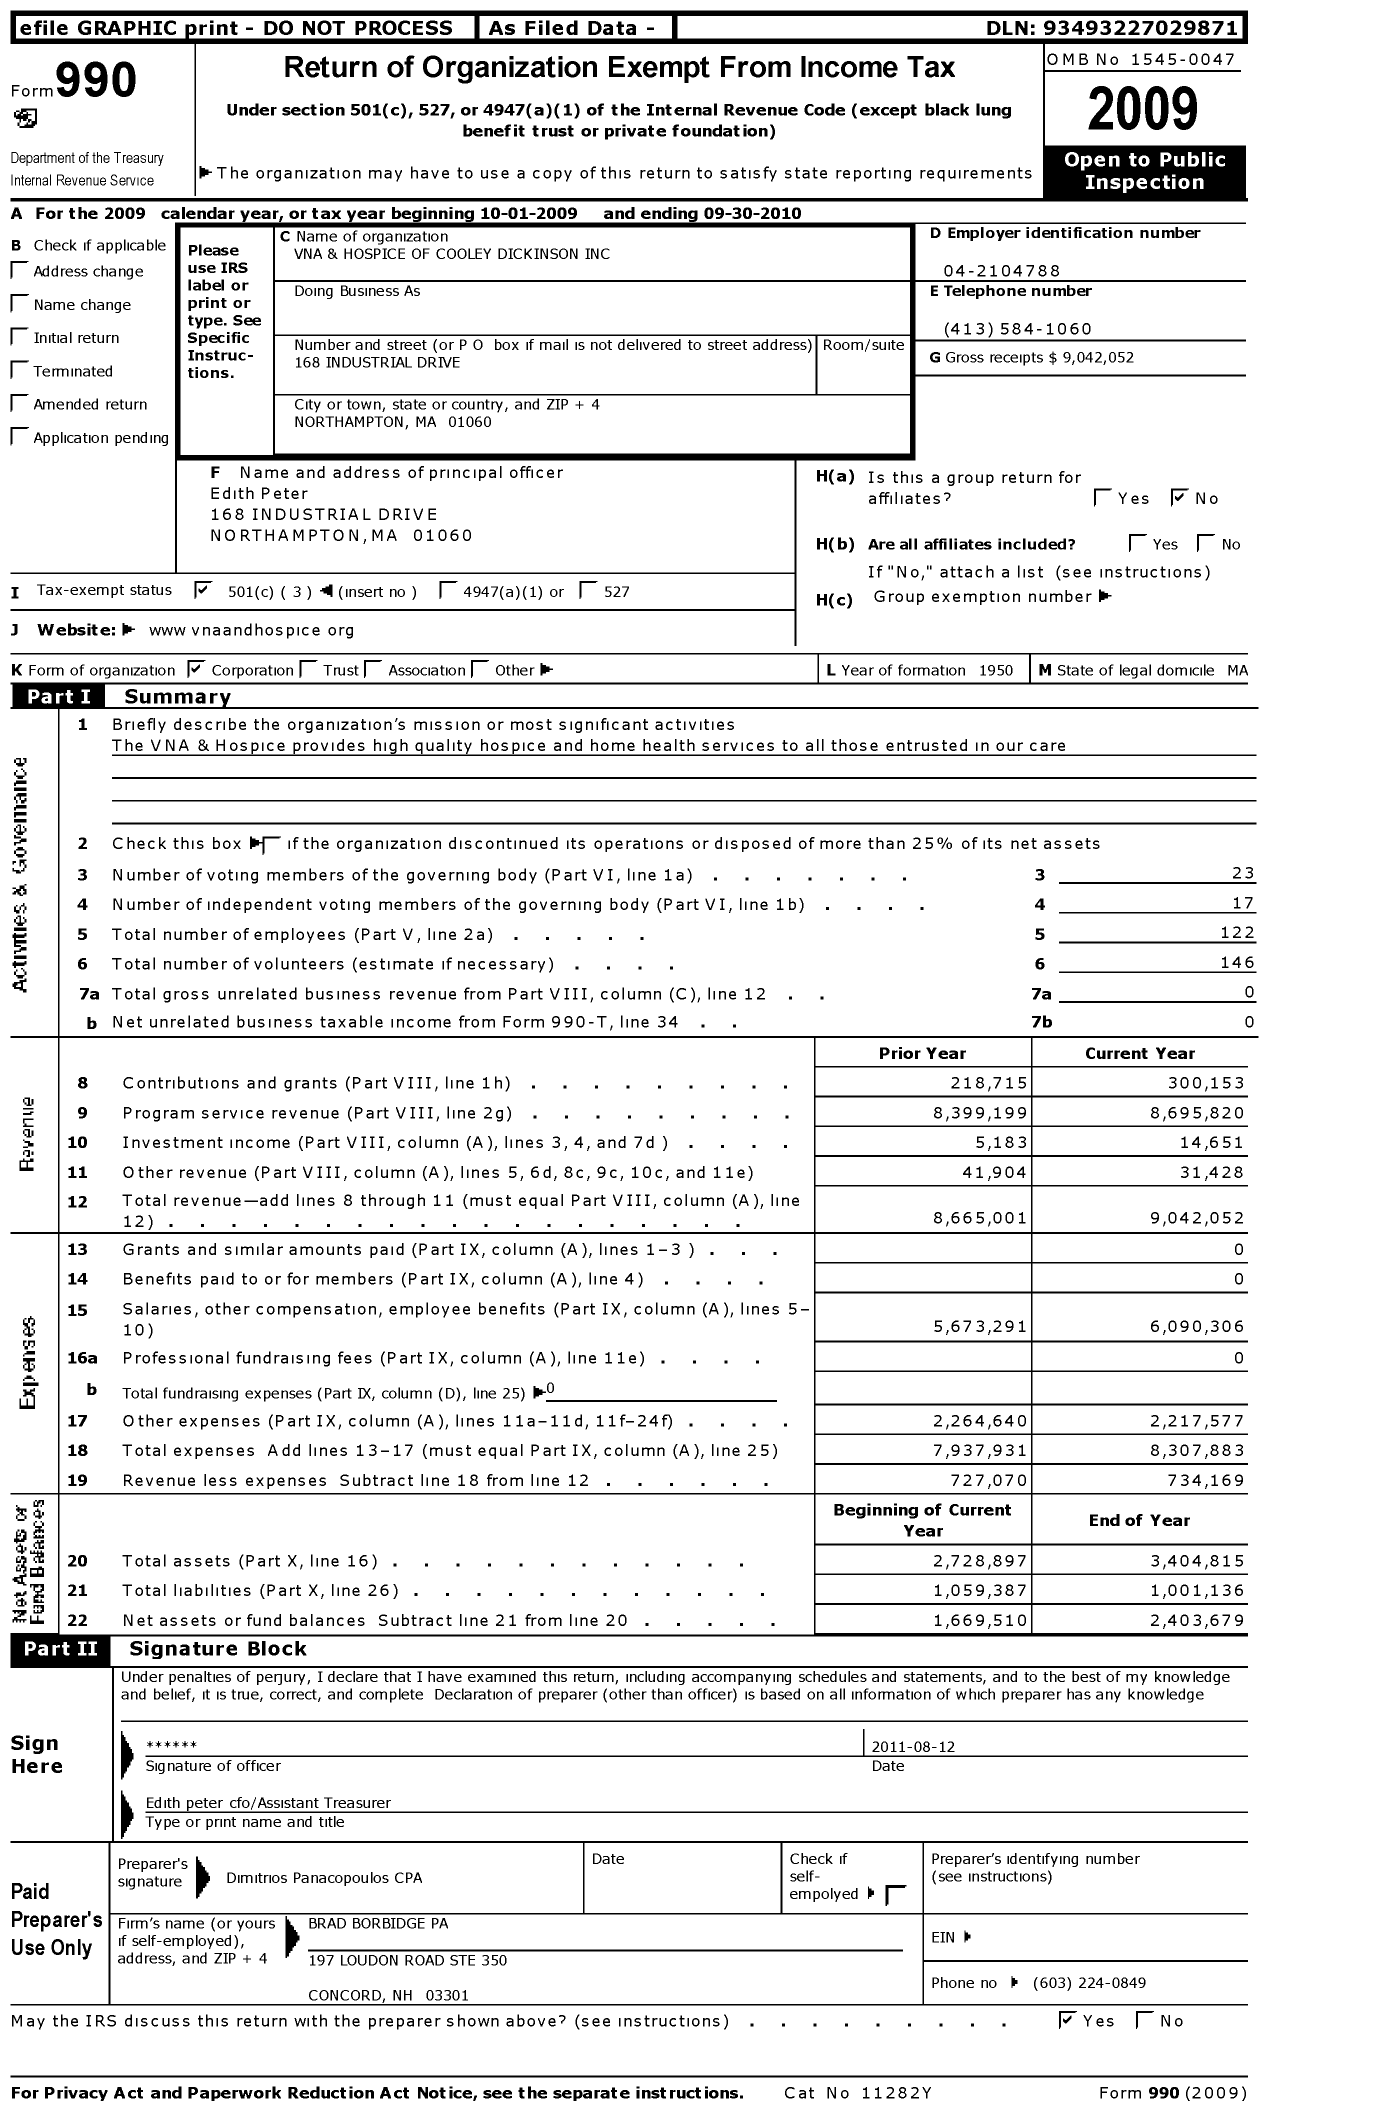 Image of first page of 2009 Form 990 for Vna and Hospice of Cooler Dickinson